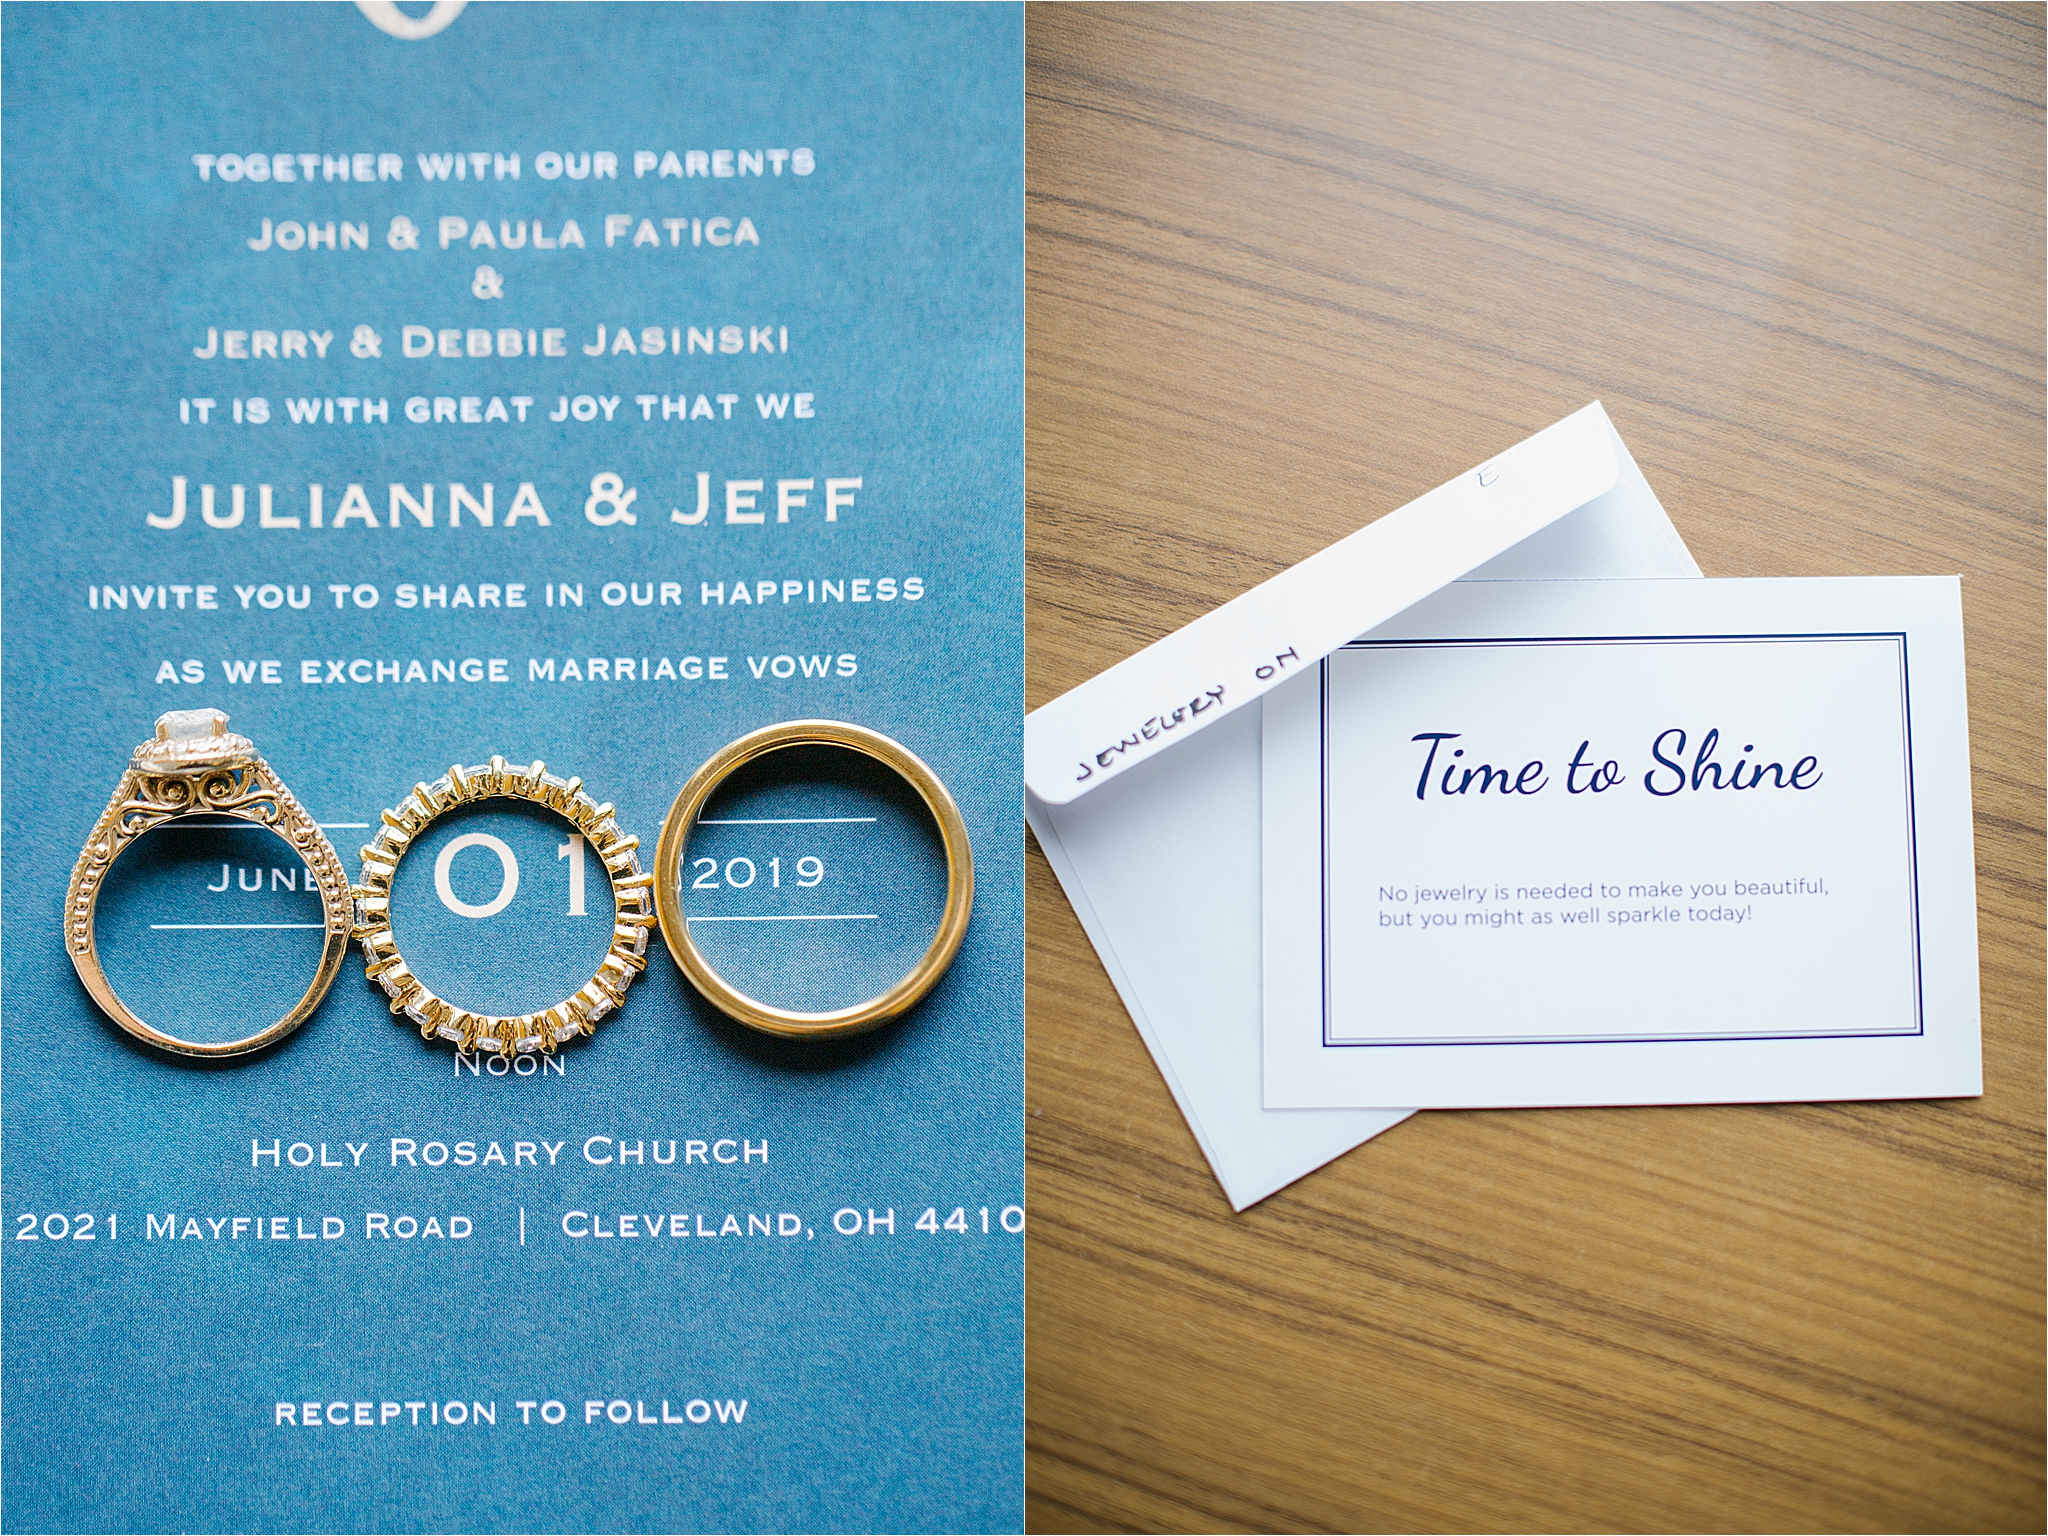 Intricate gold engagement ring on invitation and Groom notes to the bride for day of wedding